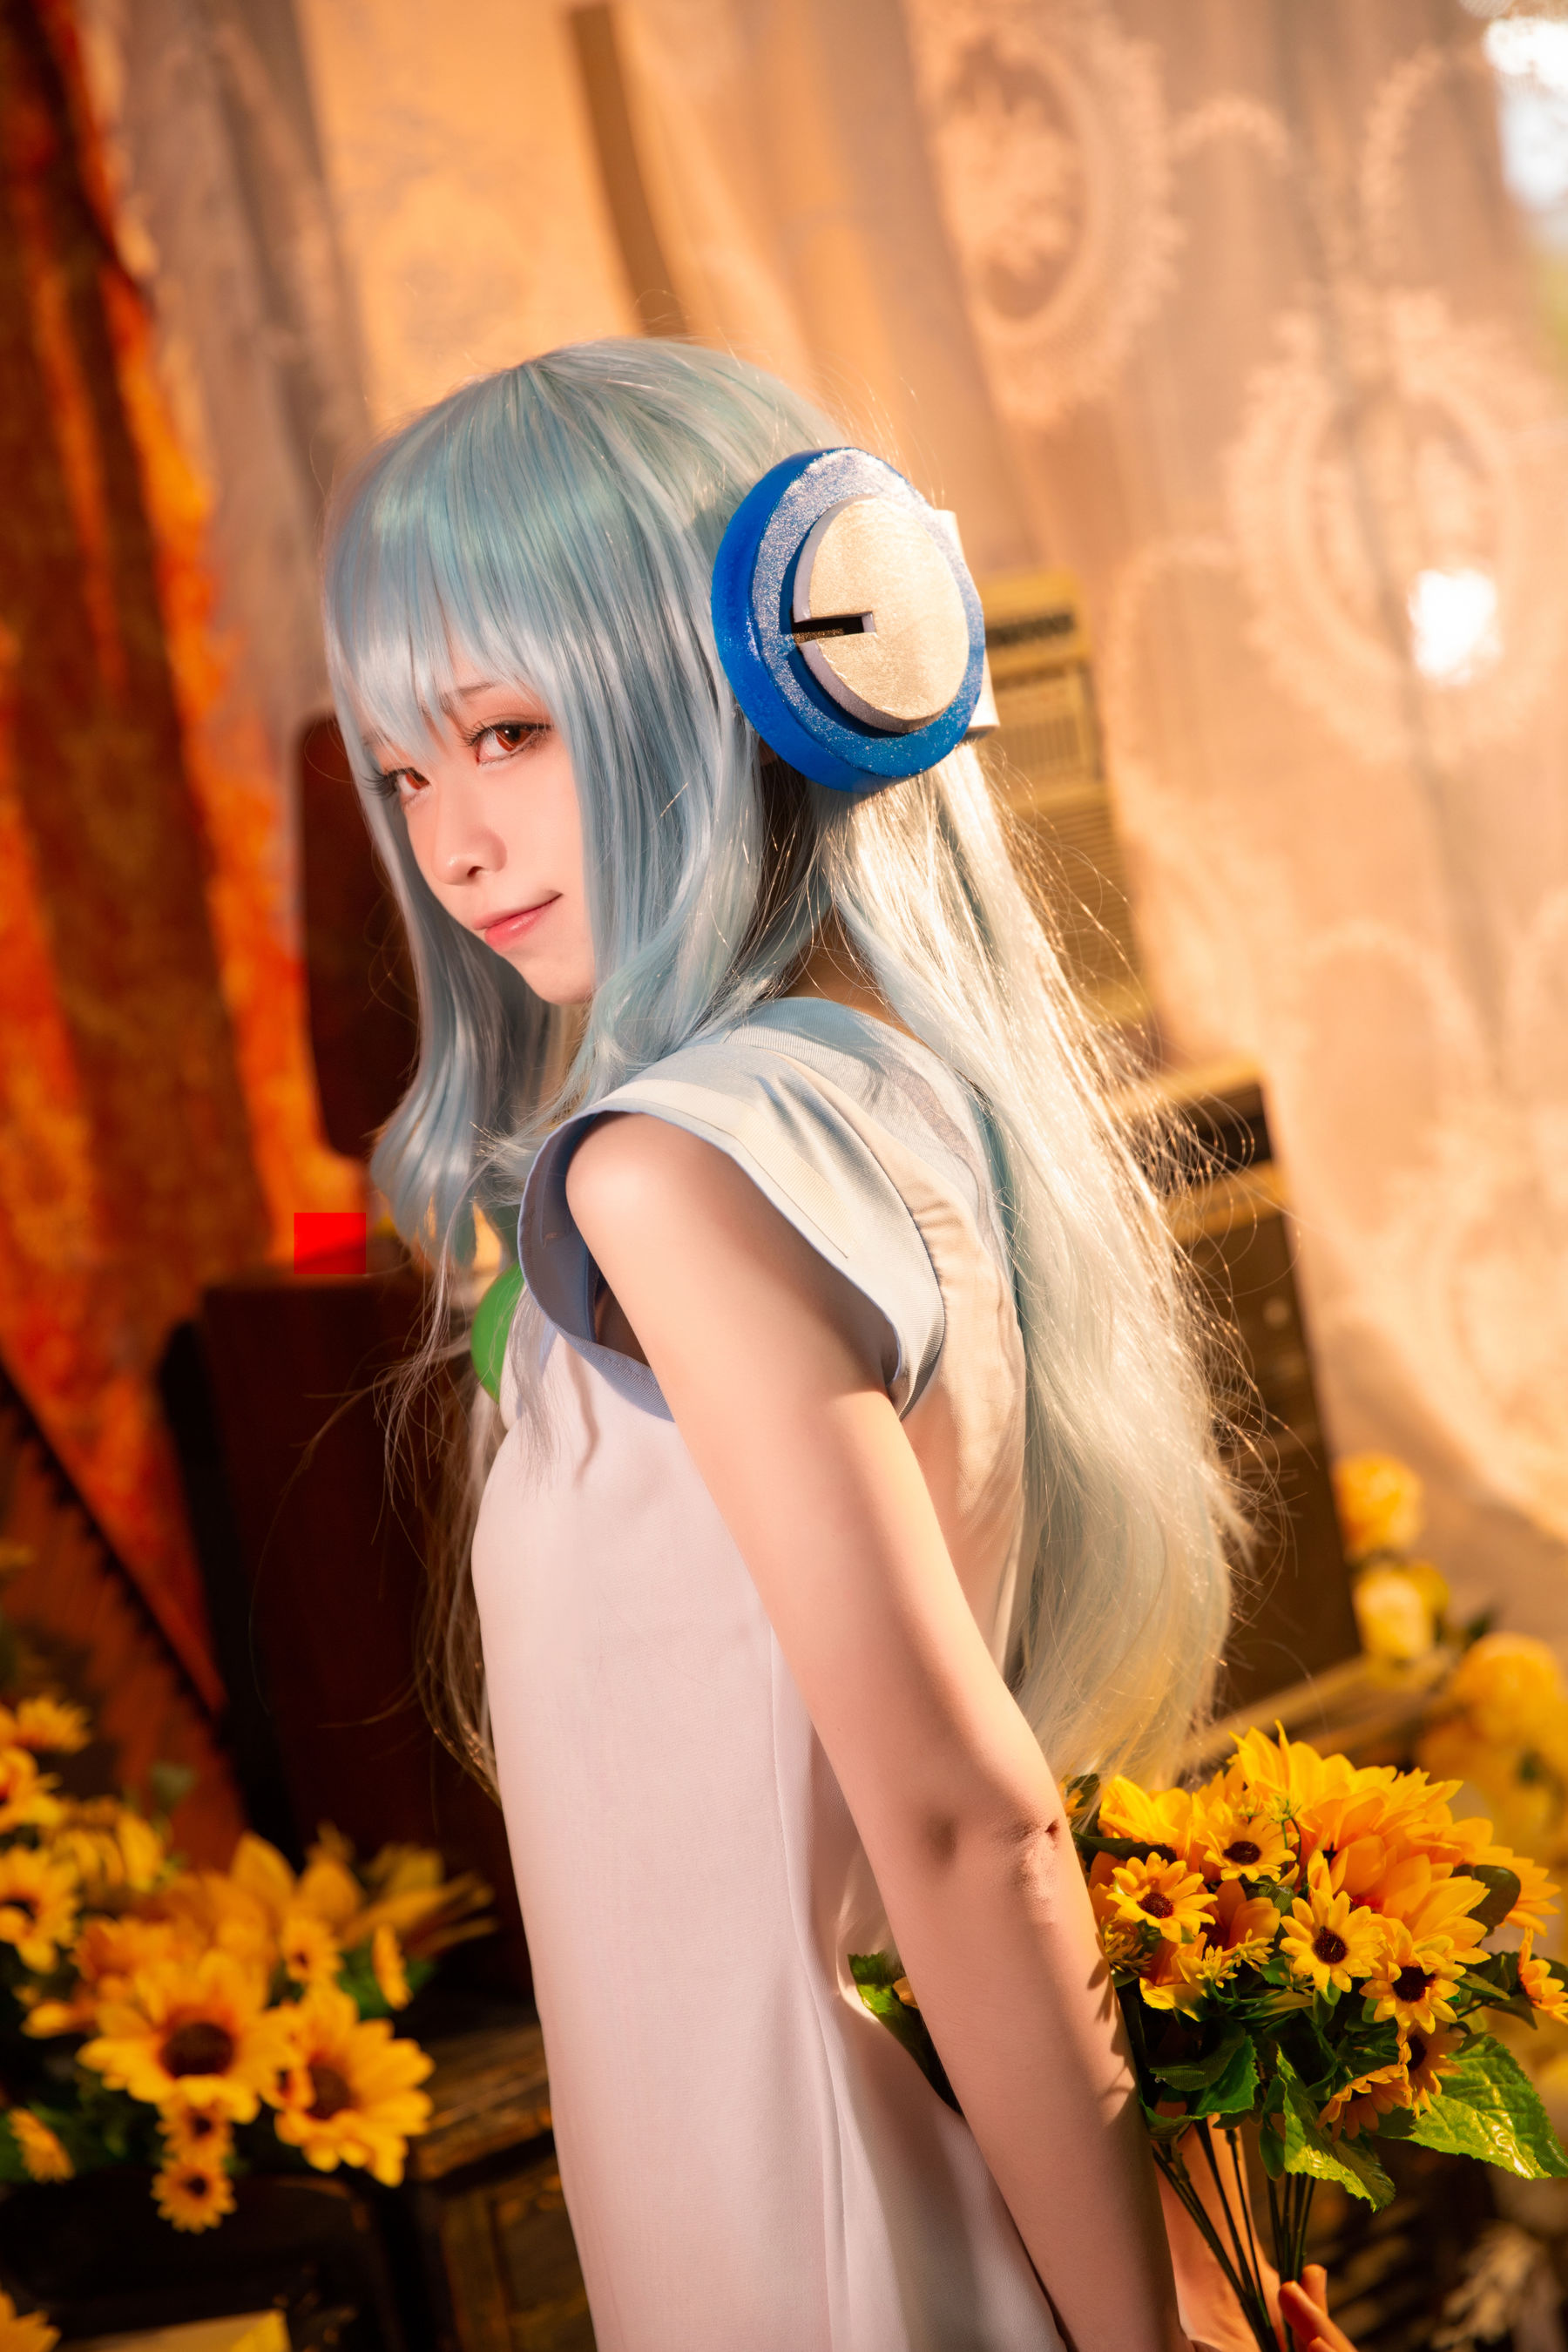 [Net Red COSER Photo] Anime blogger G44 will not be hurt - Music Box Page 6 No.649037